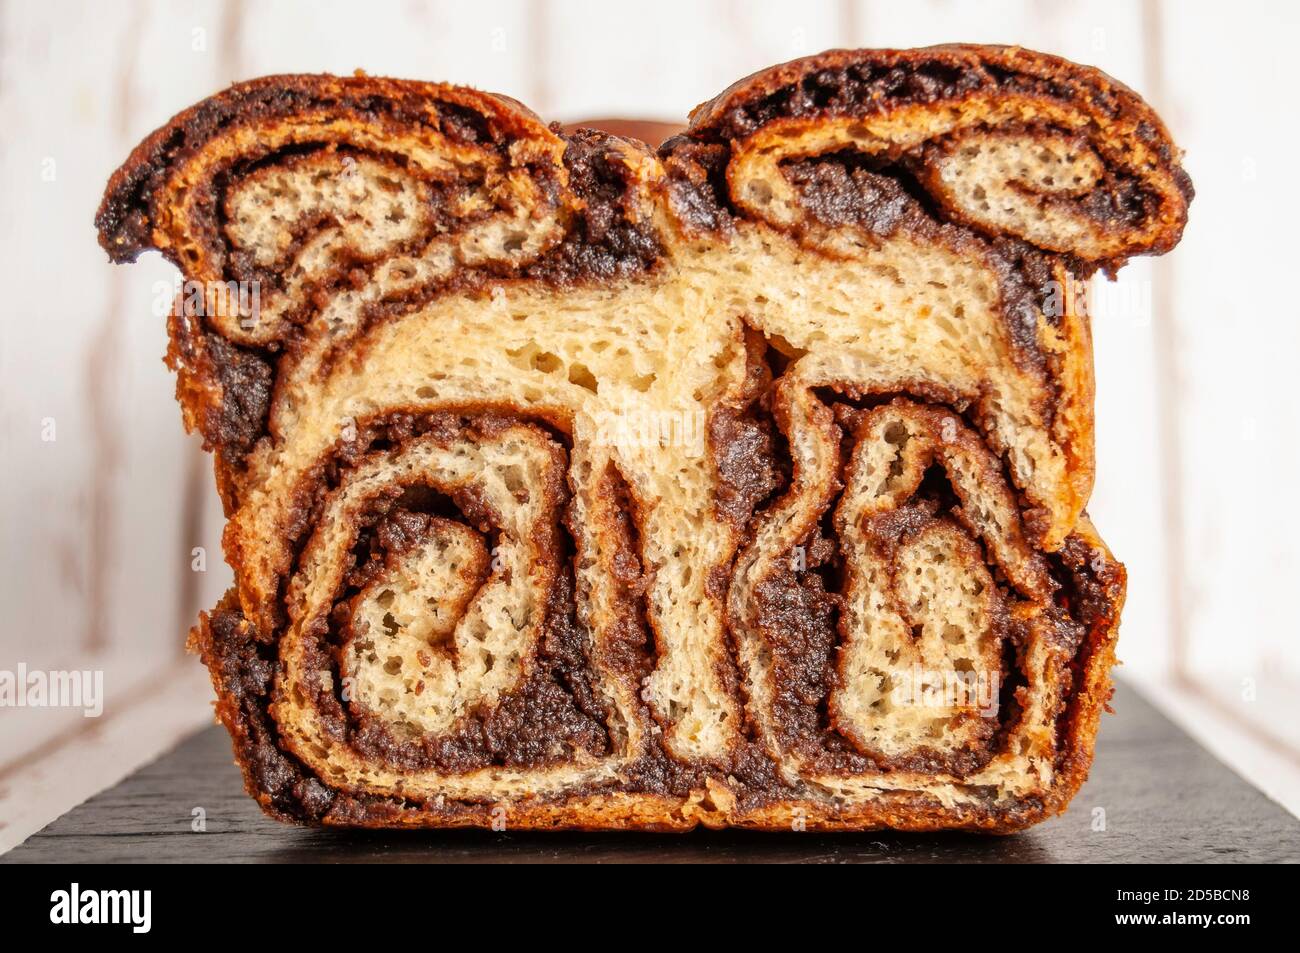 Cocoa and nuts sweet bread on black plate, front view Stock Photo